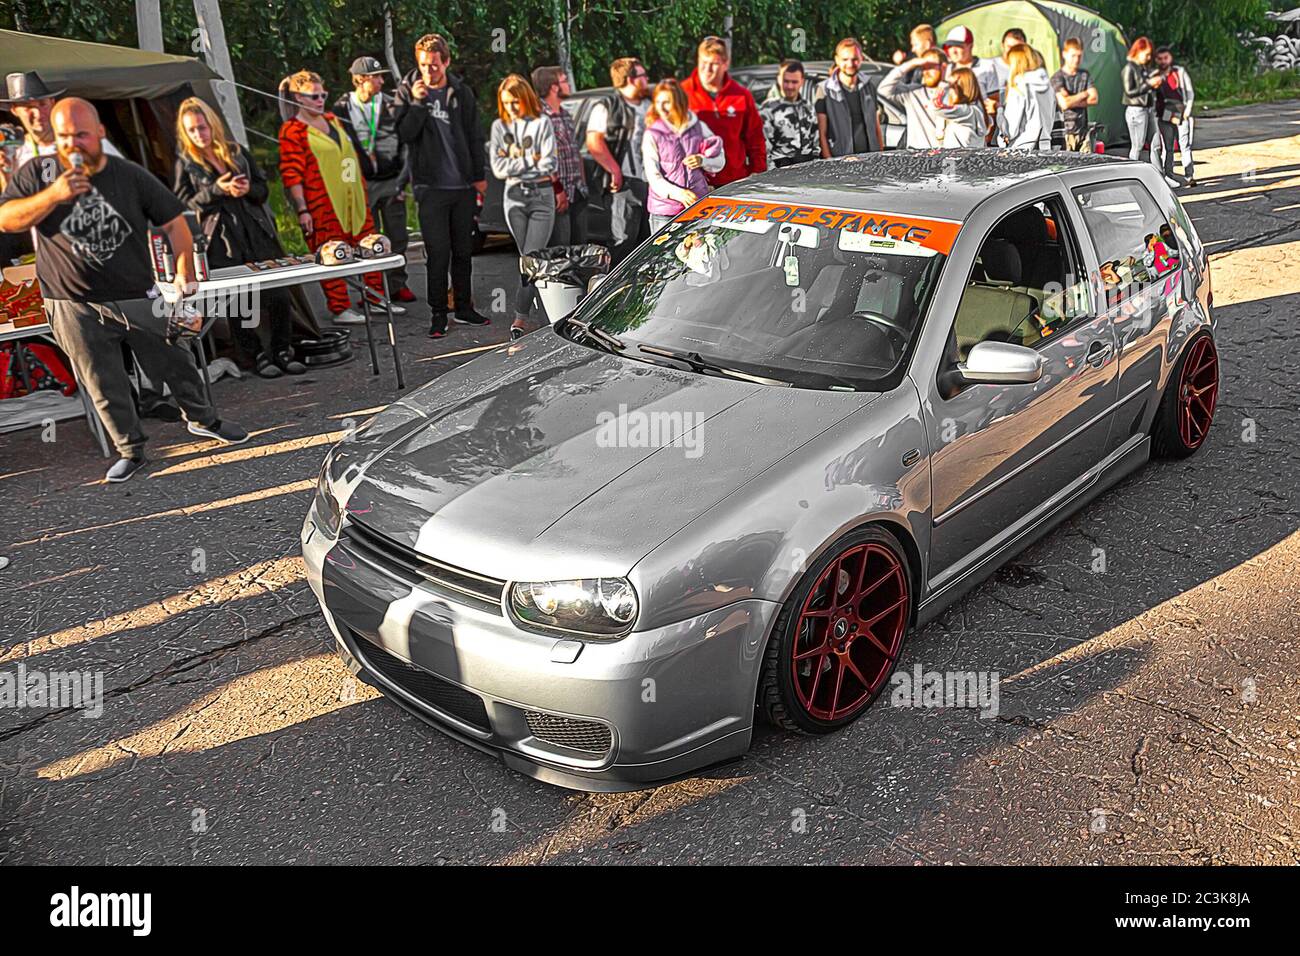 Moscow, Russia - July 19, 2019: Tuned low sport hatchback with red Candy colored alloy wheels. Volkswagen Golf mk 4 is on the street. Stanced lowrider with badboy hood Stock Photo